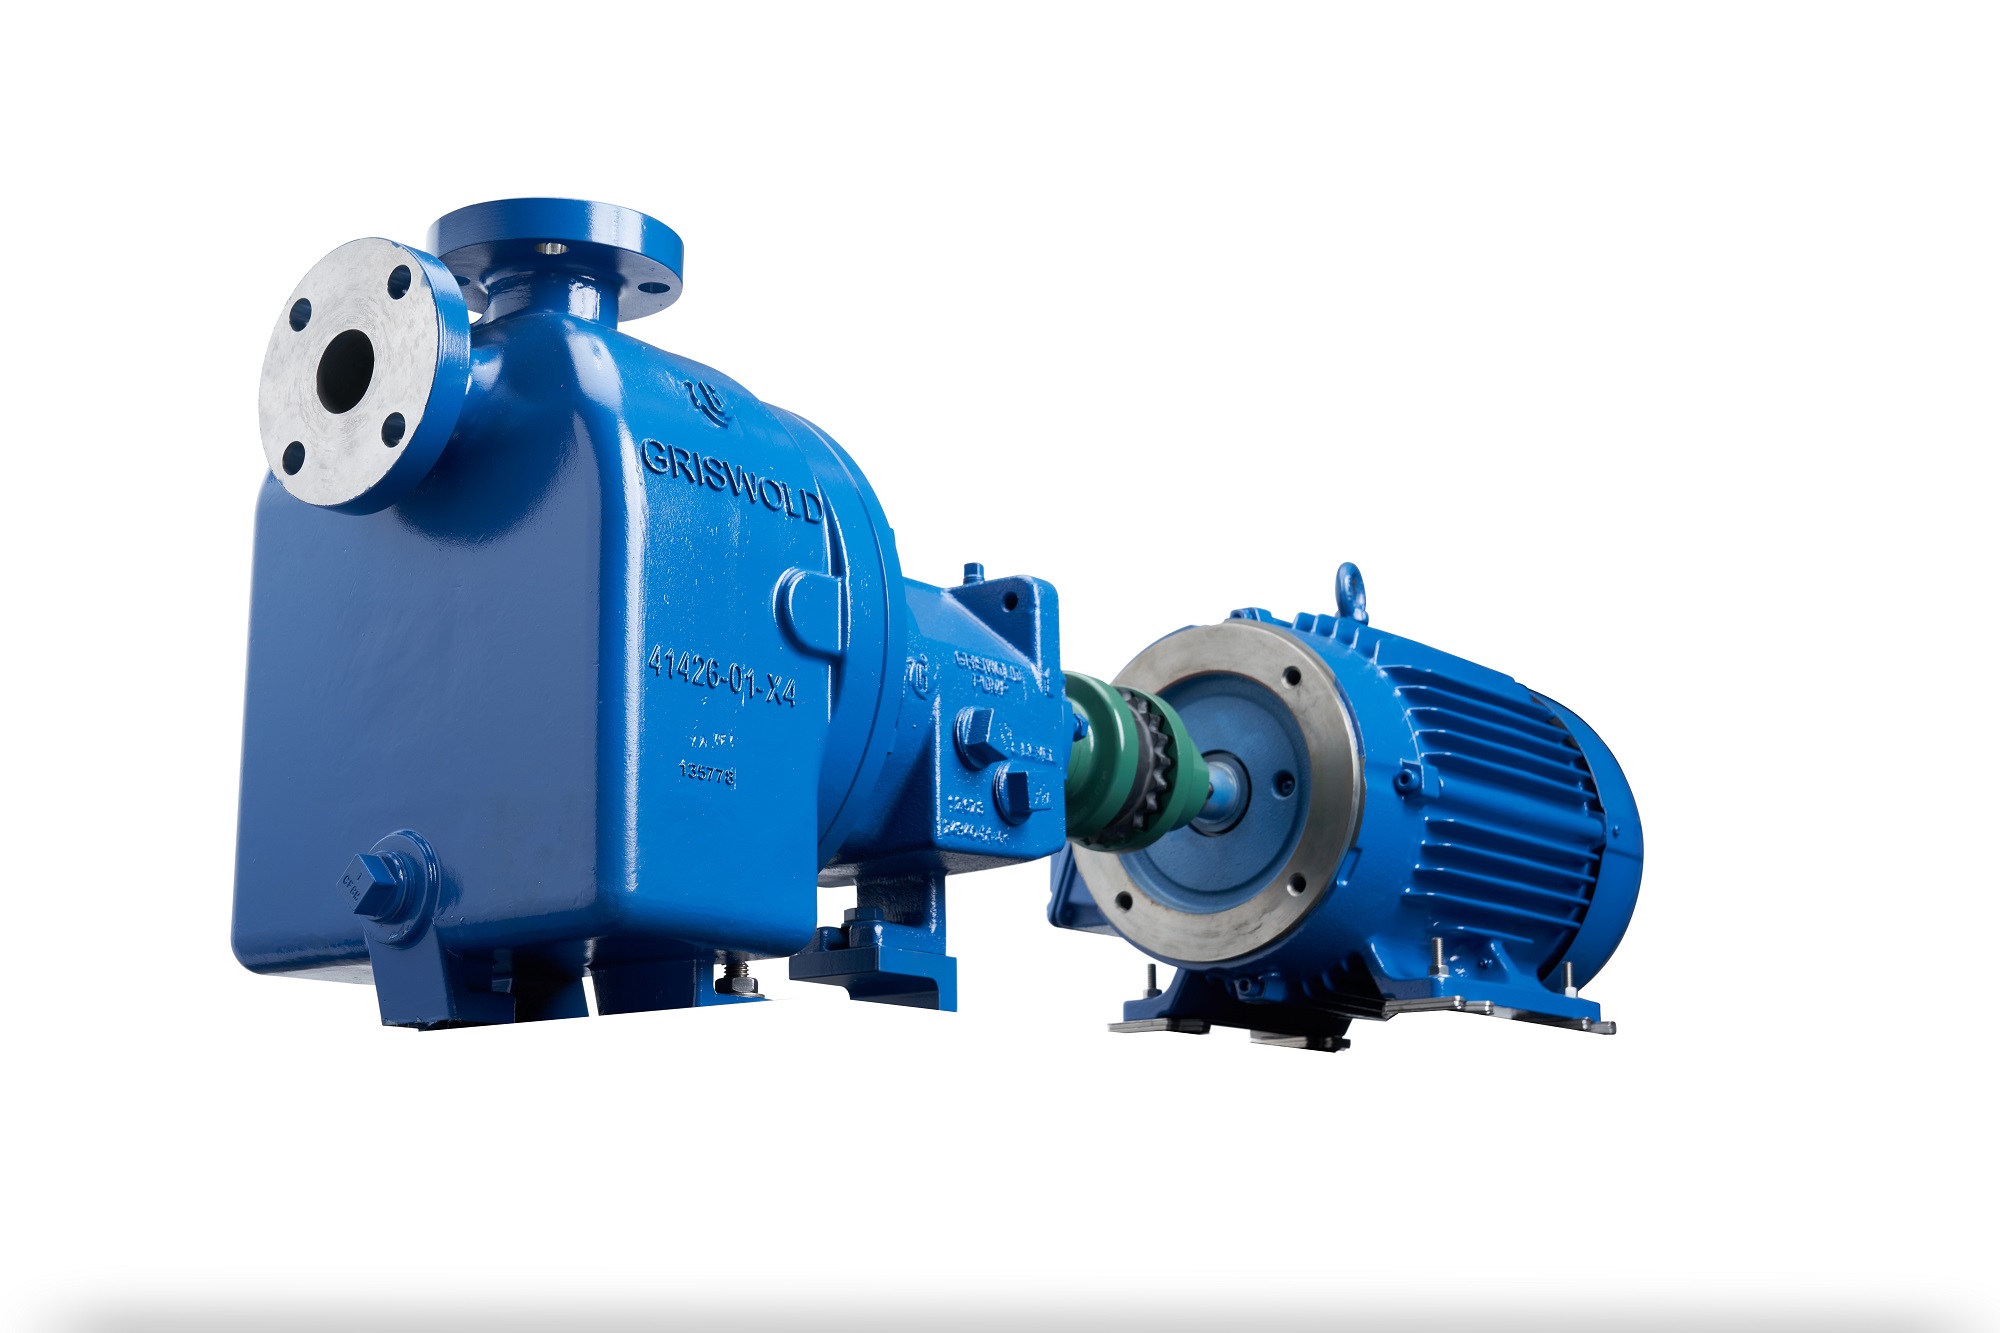 The pumps have common components with the Griswold 811 ANSI Series and offer pump and part interchangeability with competitor models.